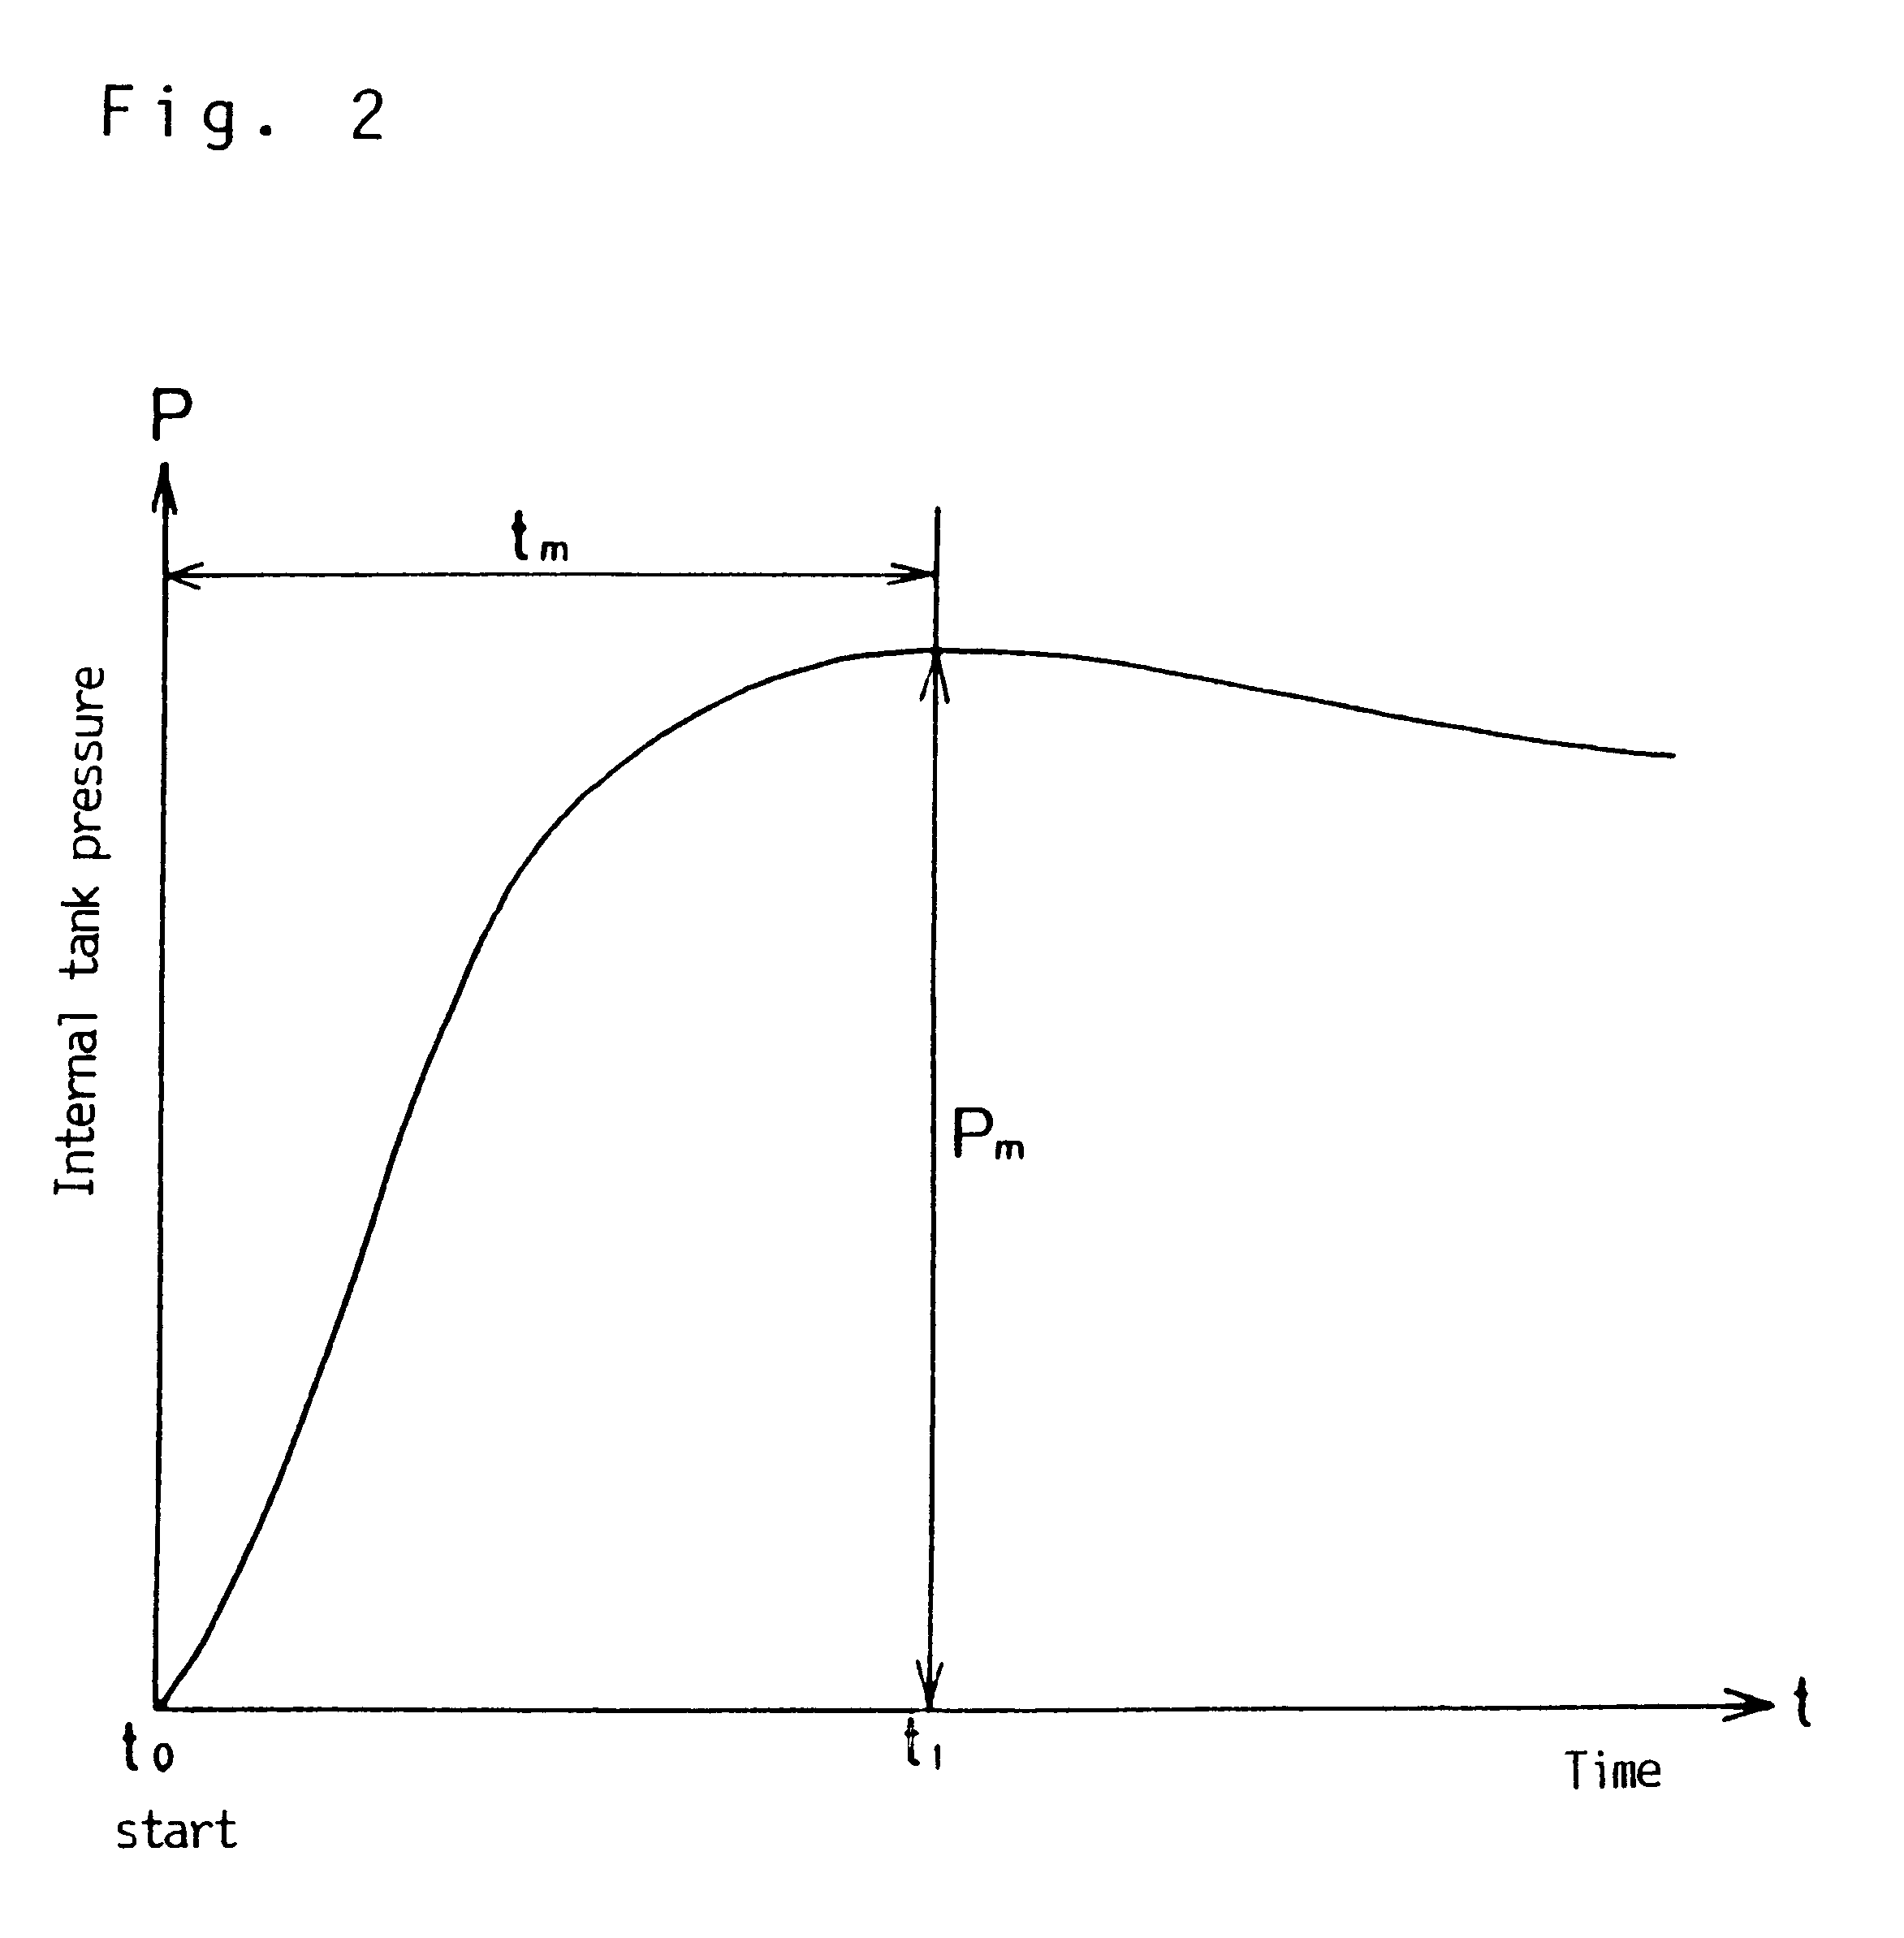 Spontaneous firing explosive composition for use in a gas generator for an airbag